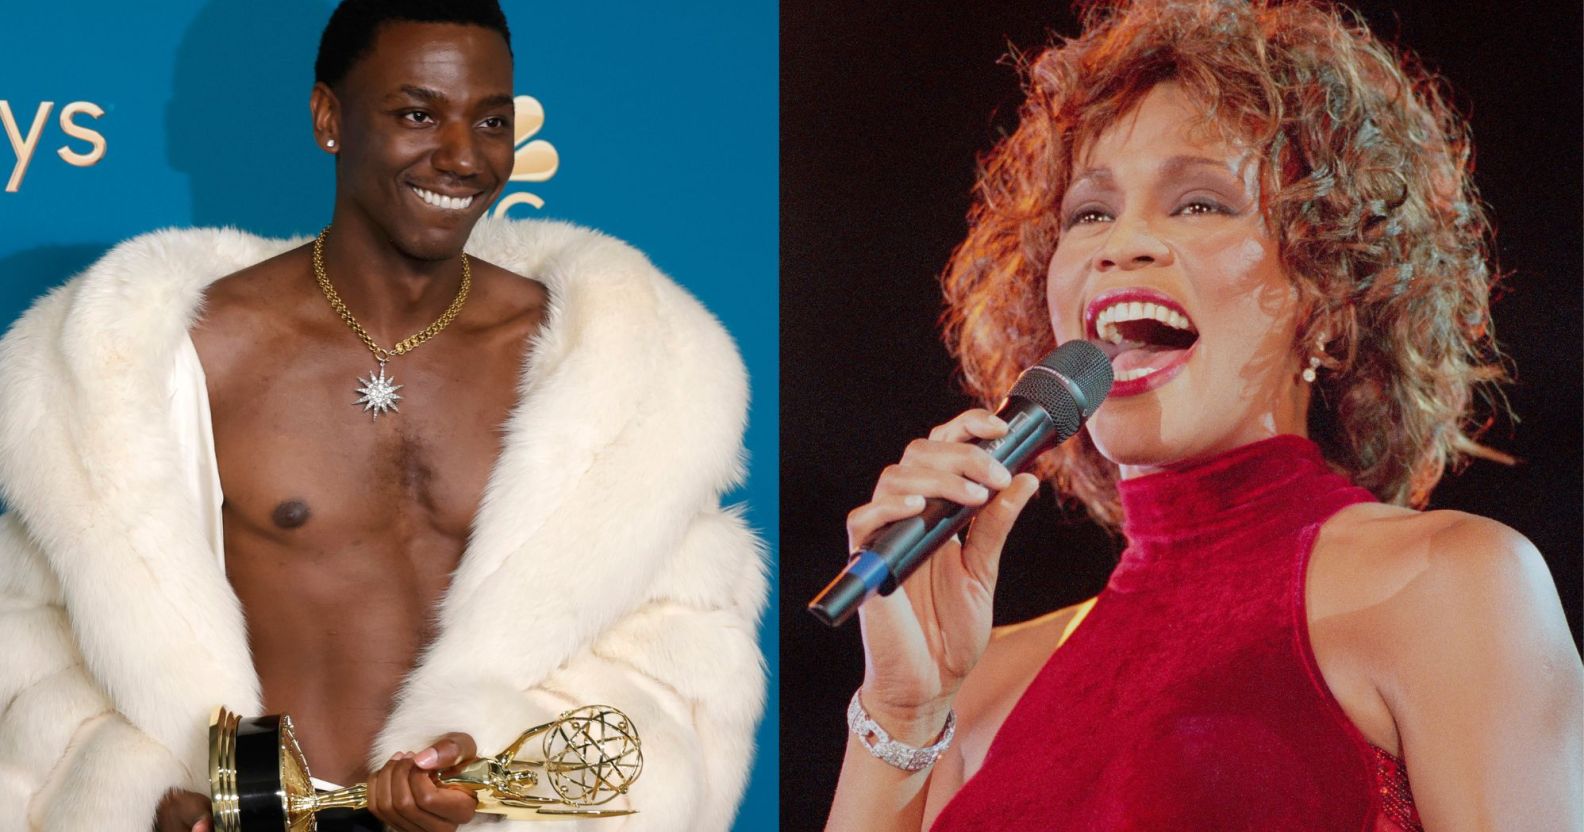 On the left, Jerrod Carmichael on the Emmy red carpet wearing a white fur coat and an exposed chest holding a golden Emmy Award. On the right, Whitney Houston singing into a microphone while wearing a neck-high red dress.